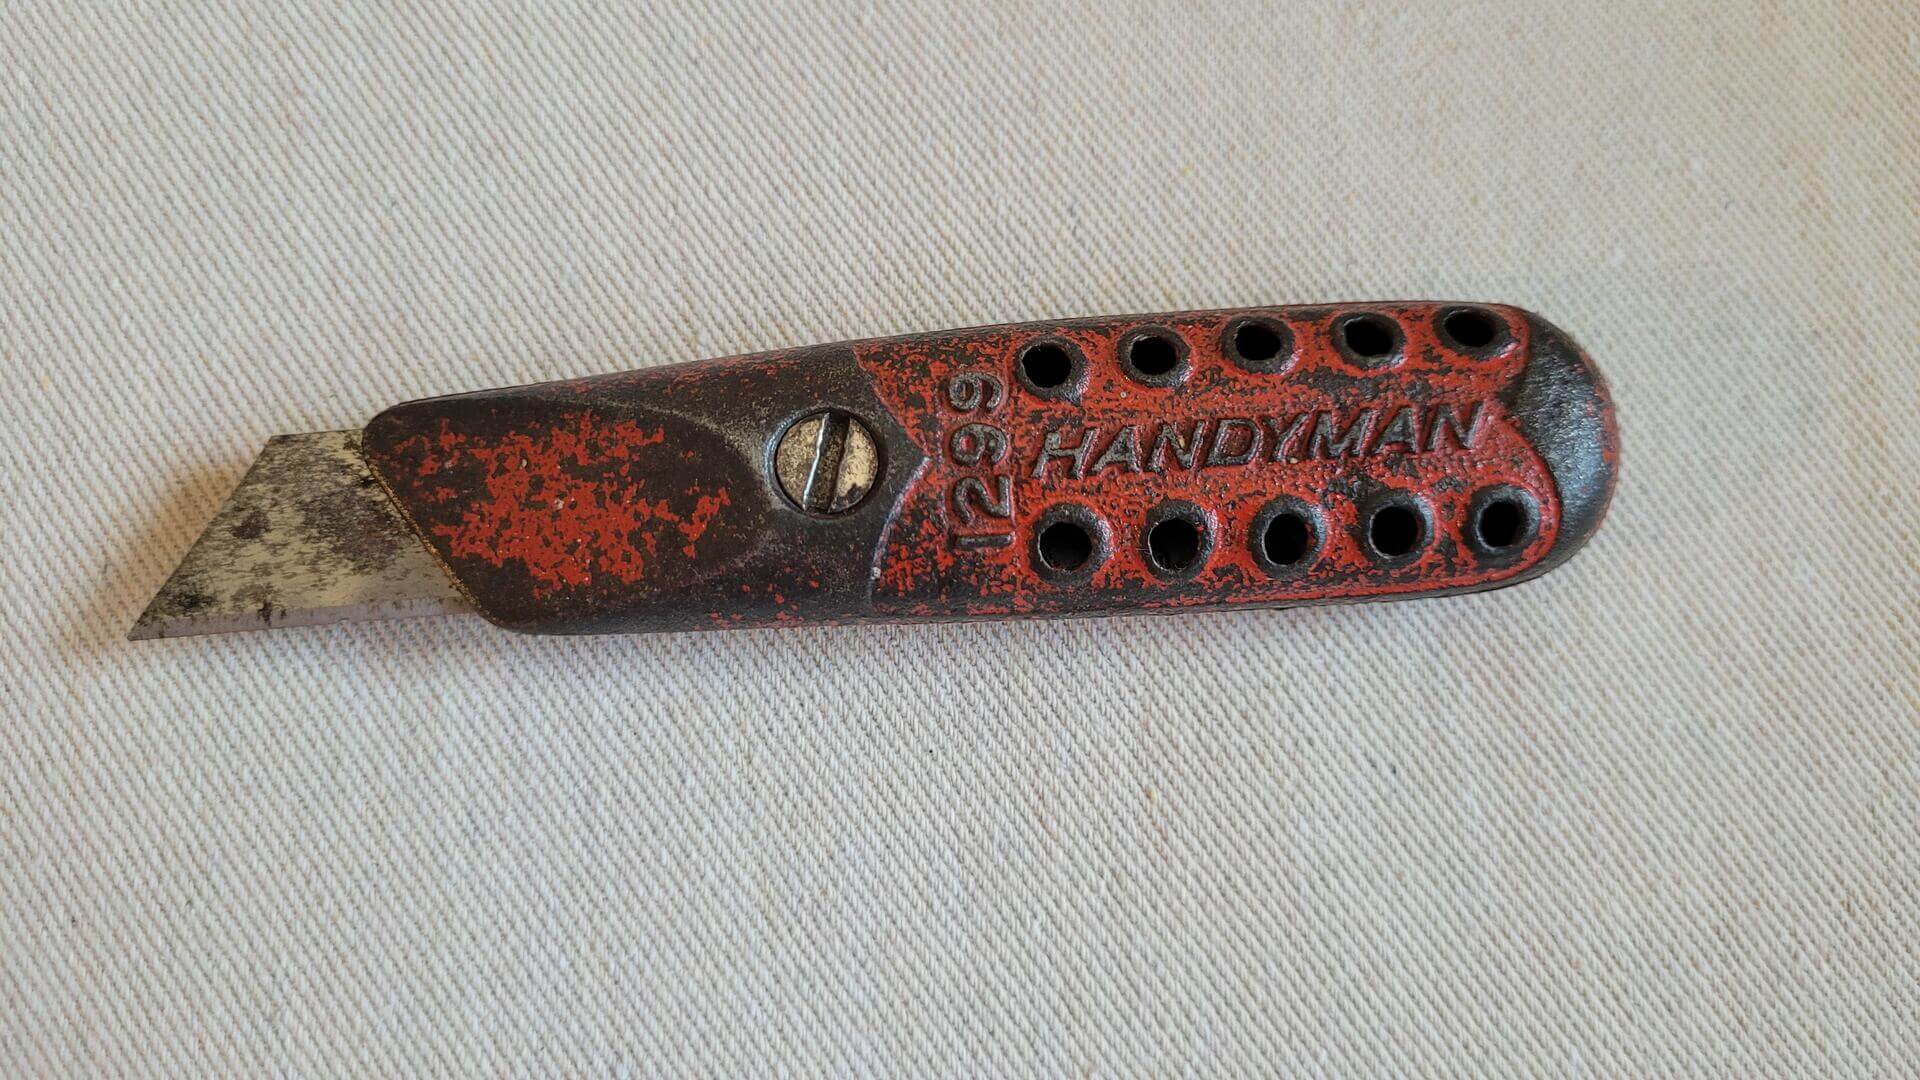 Rare Stanley Handyman No 1299 red metal cast iron fixed blade utility knife and box cutter 4 3/4" long with beautiful ergonomic design. Vintage made in Canada collectible hand tool marketed as Handyman line where in the USA it was branded as Stanley Defiance No 1299